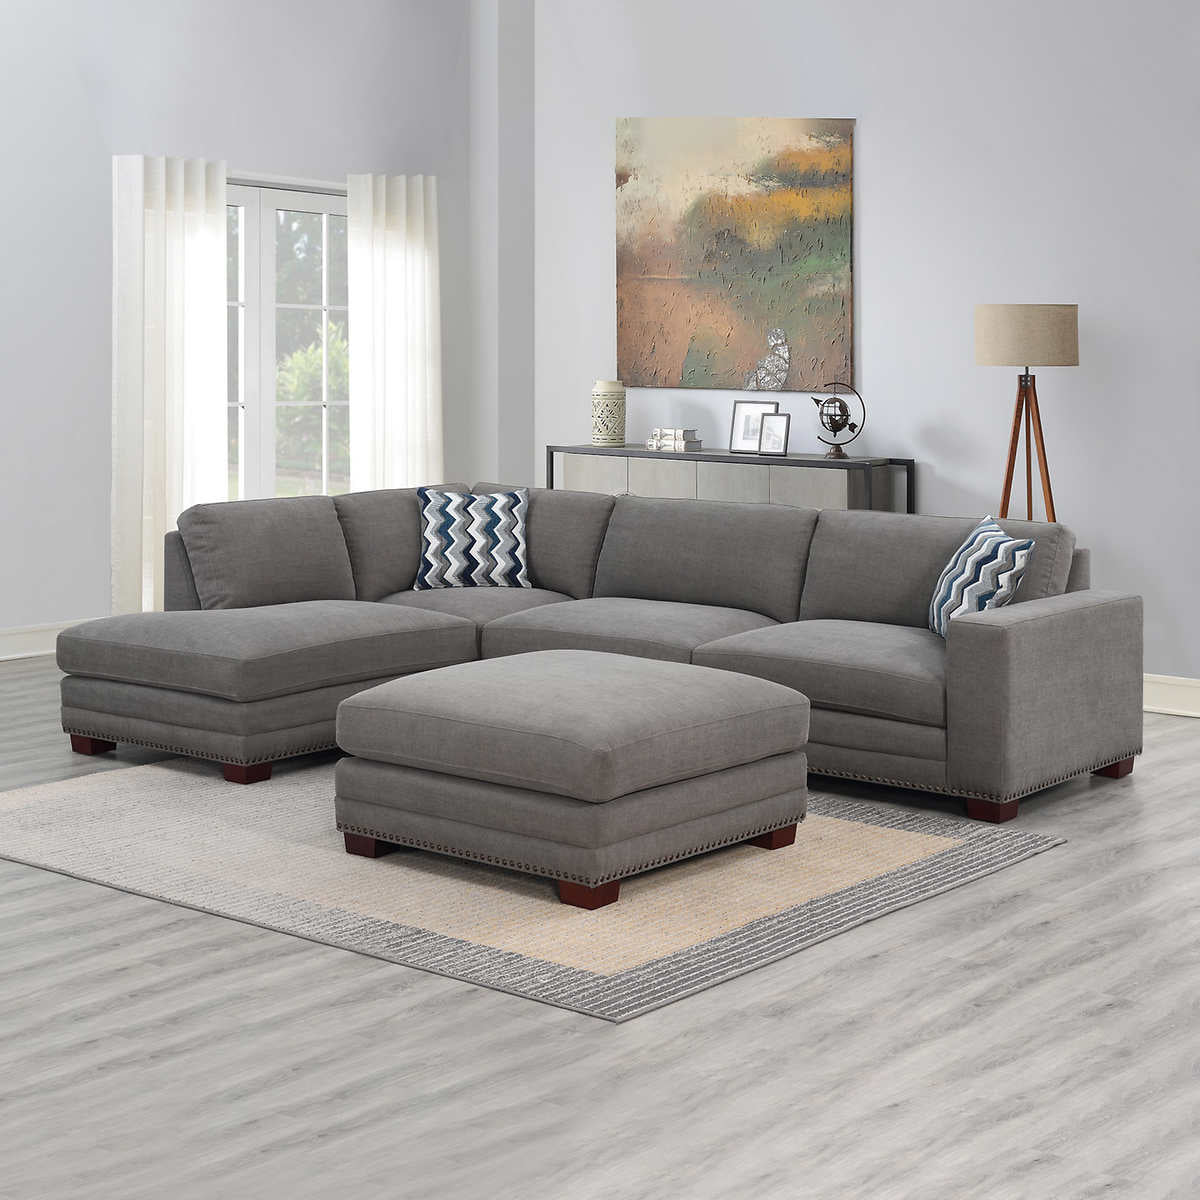 Costco - Penelope Fabric Sectional with Ottoman - Retail $1999